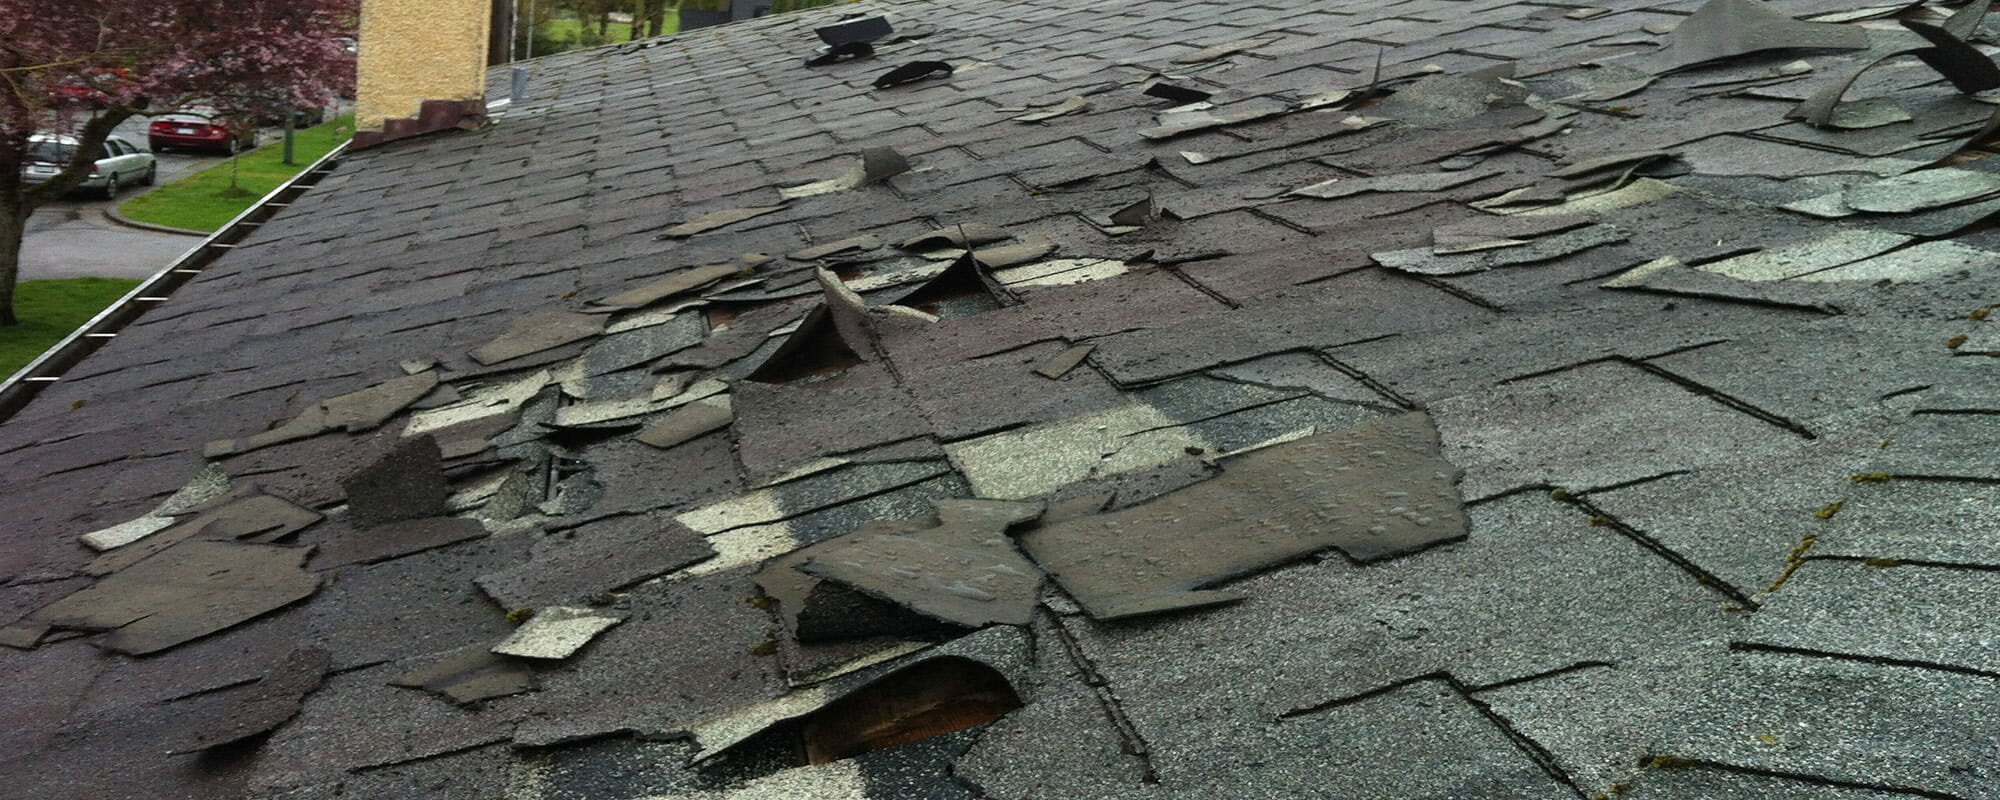 summer roof problems, Mobile 